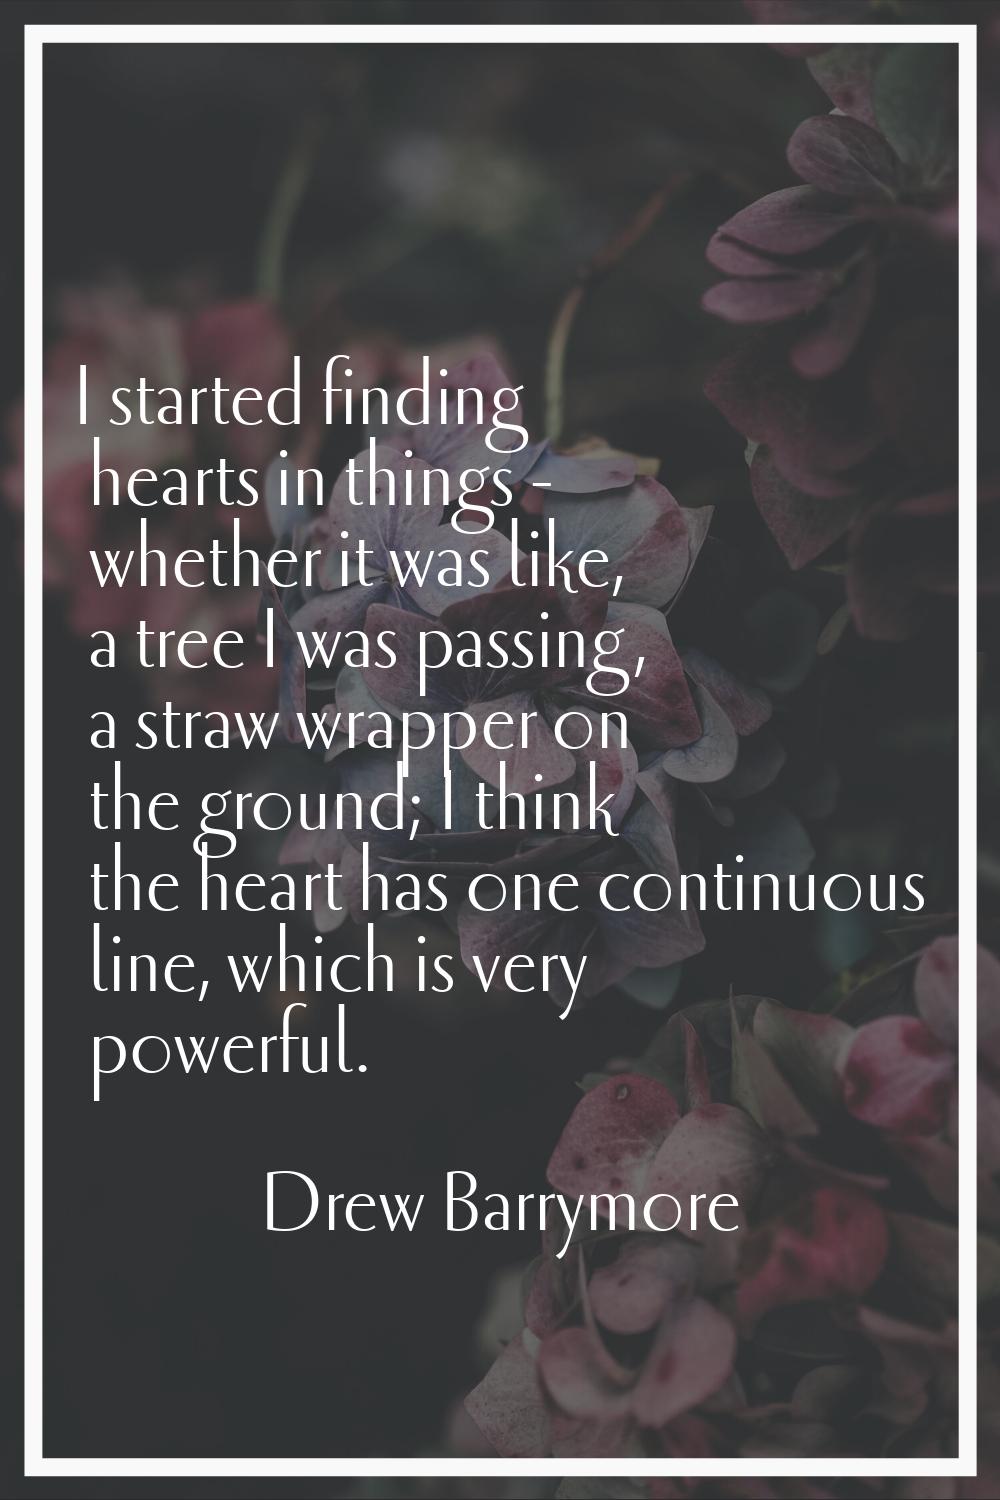 I started finding hearts in things - whether it was like, a tree I was passing, a straw wrapper on 